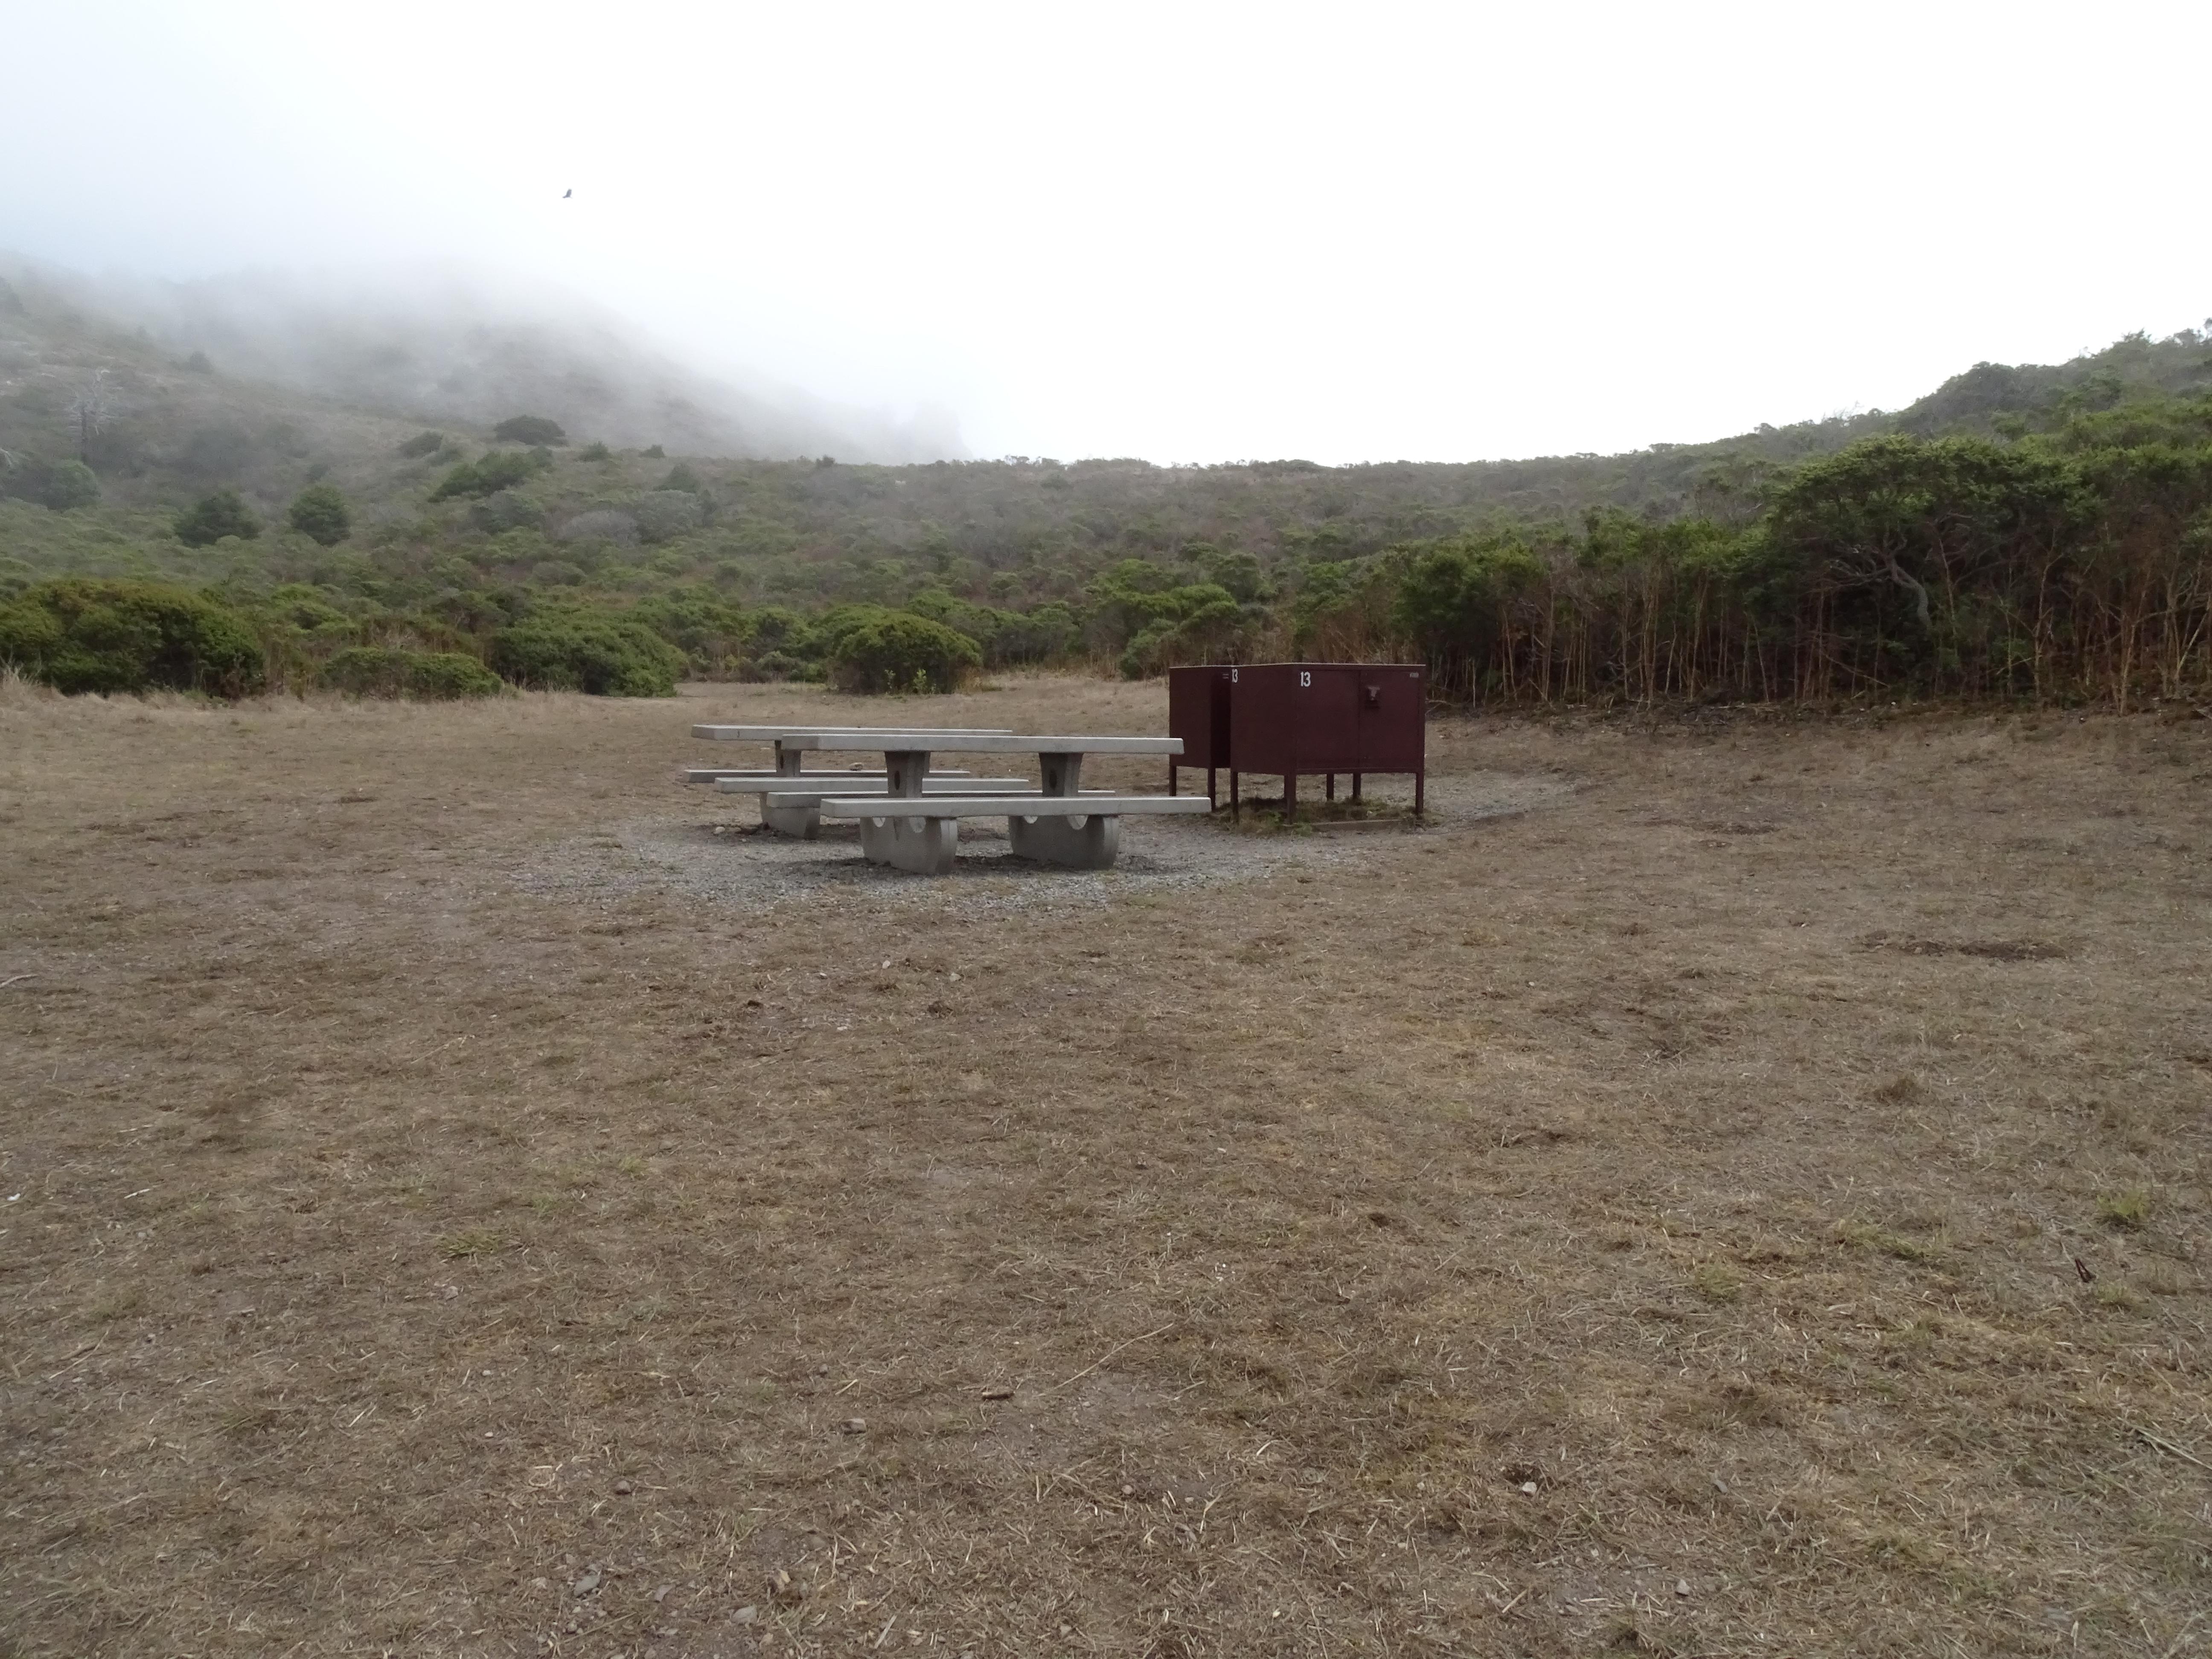 A campsite containing two picnic tables & two food storage lockers in front of a shrub-covered hill.